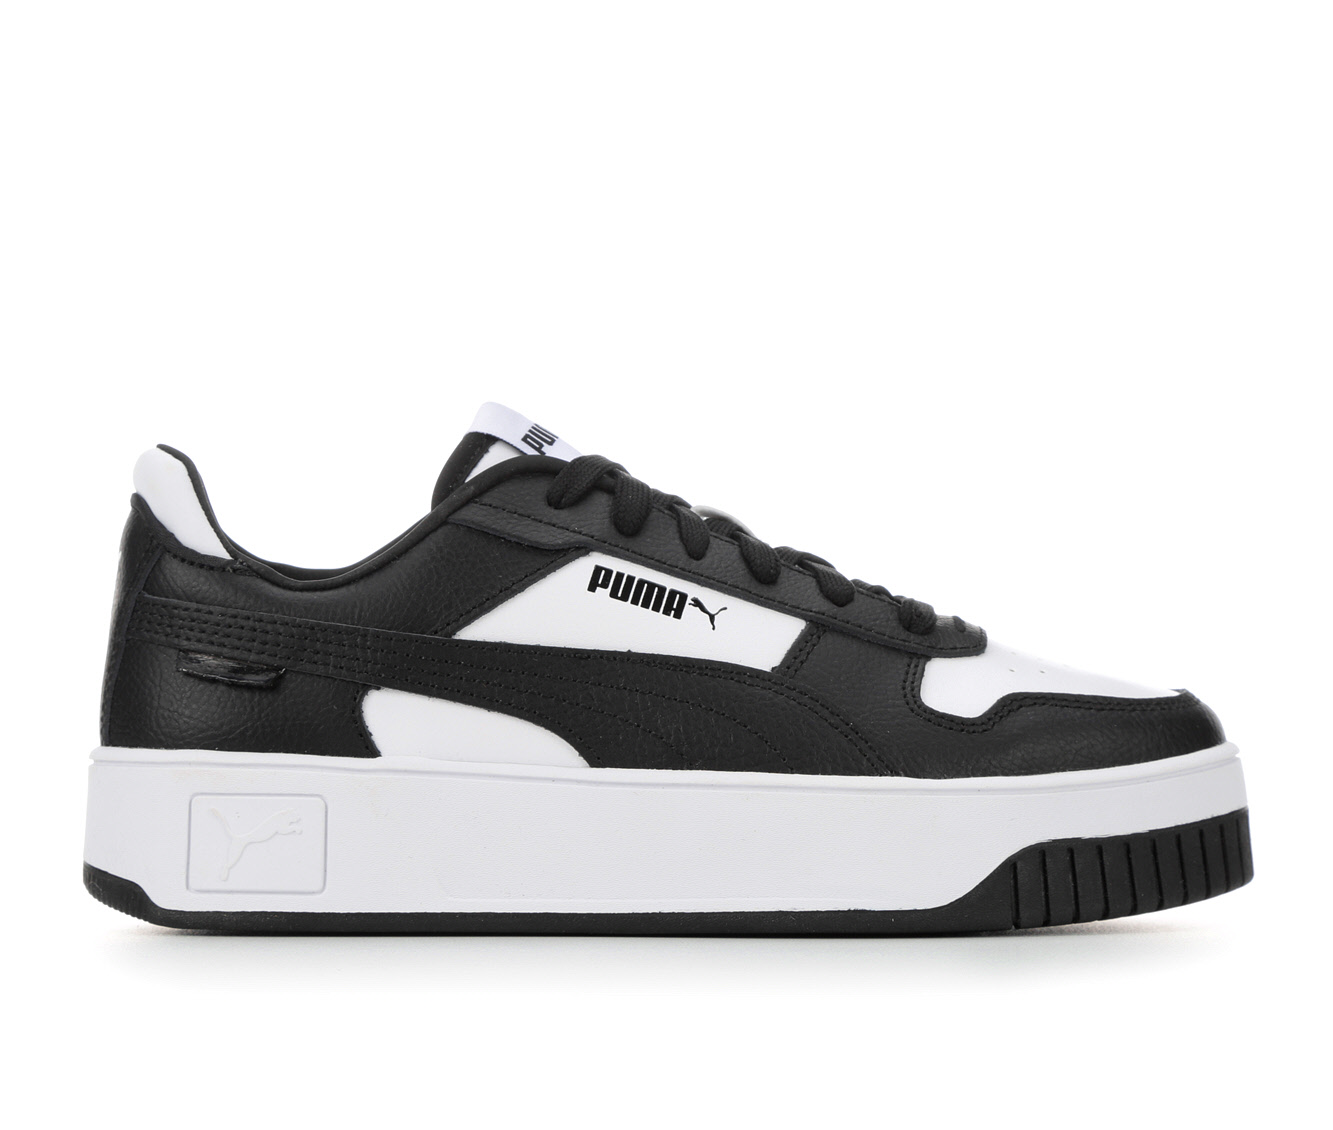 dosis Mose Opsætning PUMA Shoes & Accessories | Shoe Carnival